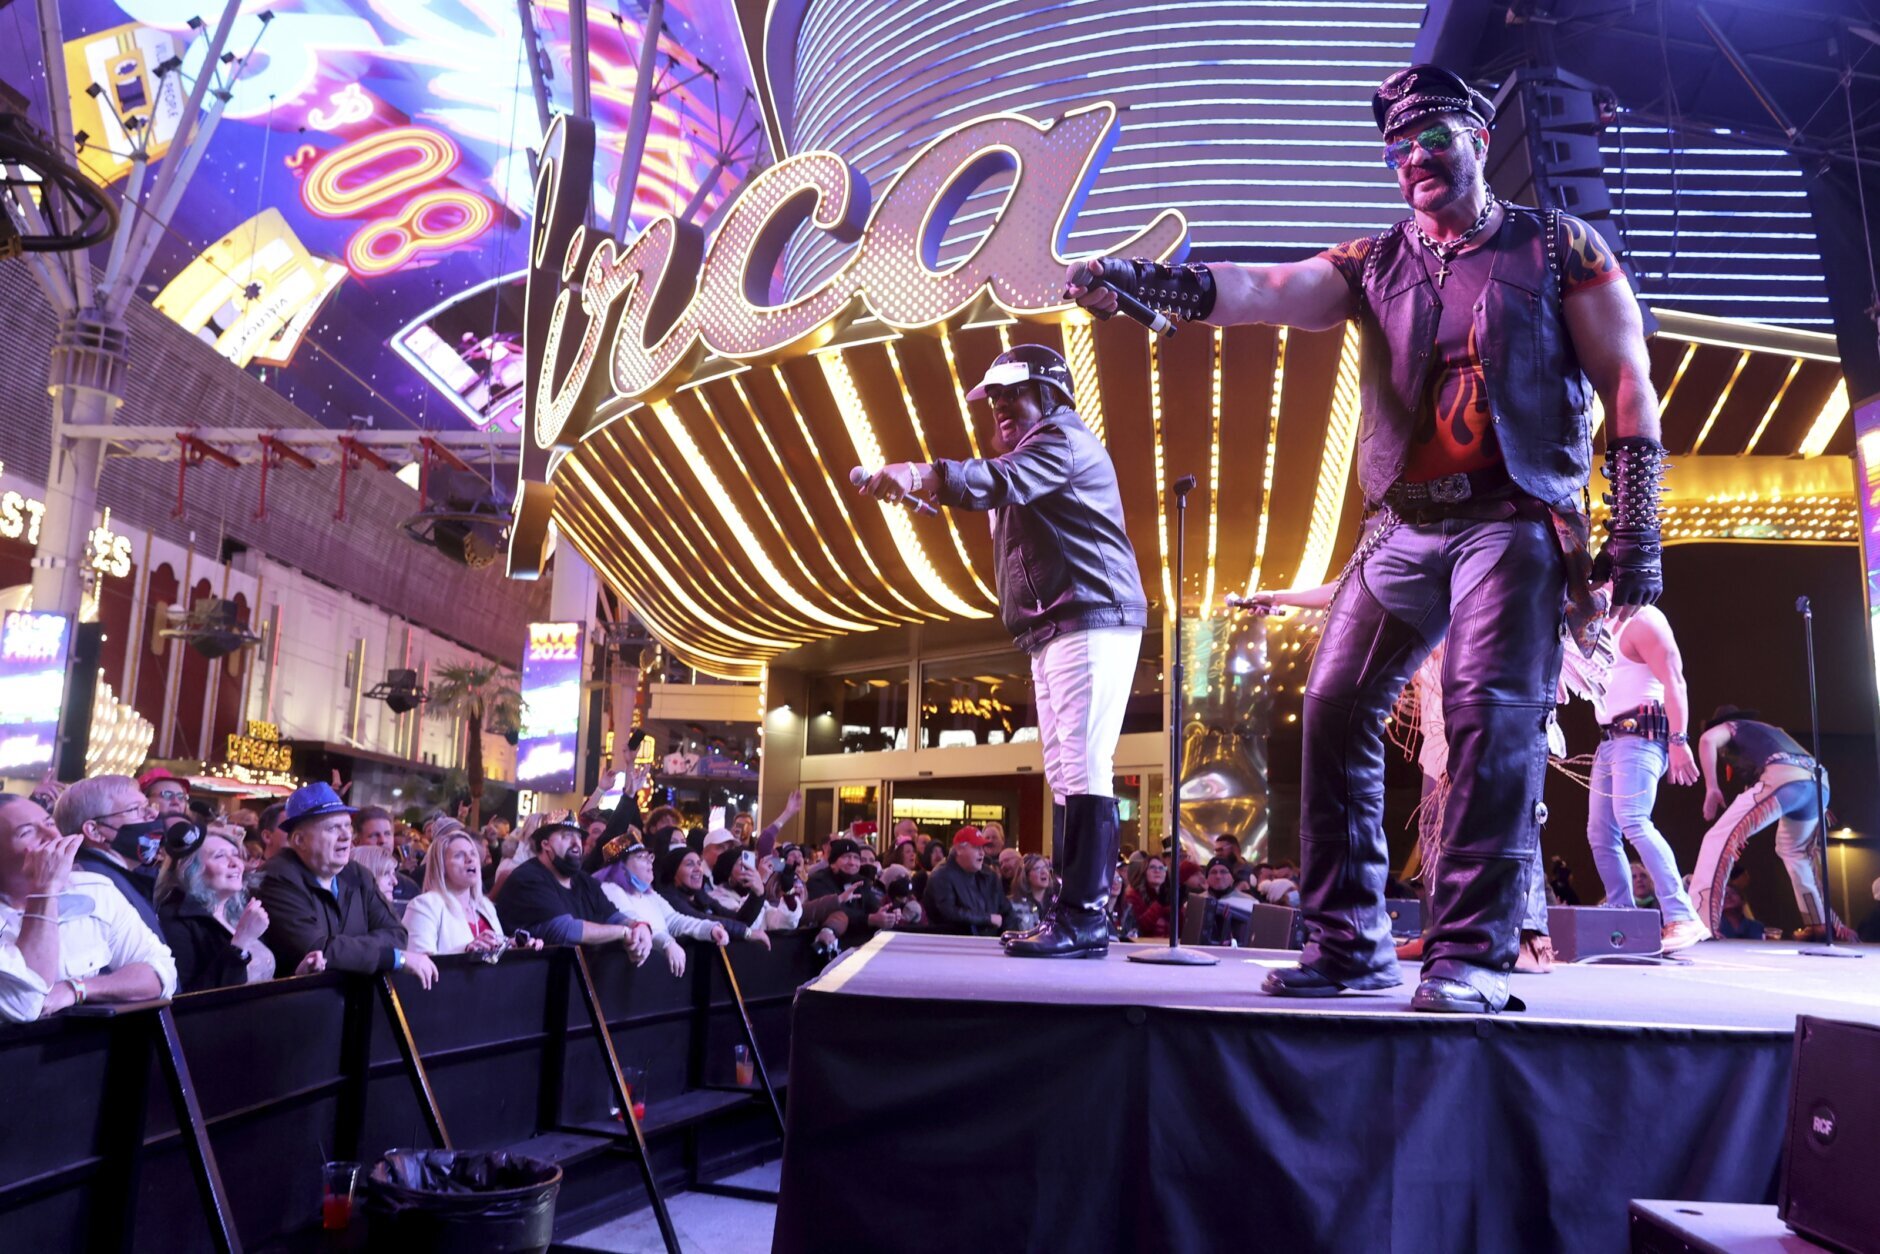 The Village People perform on New Year's Eve at the Fremont Street Experience in downtown Las Vegas Friday, Dec. 31, 2021. (K.M. Cannon/Las Vegas Review-Journal via AP)